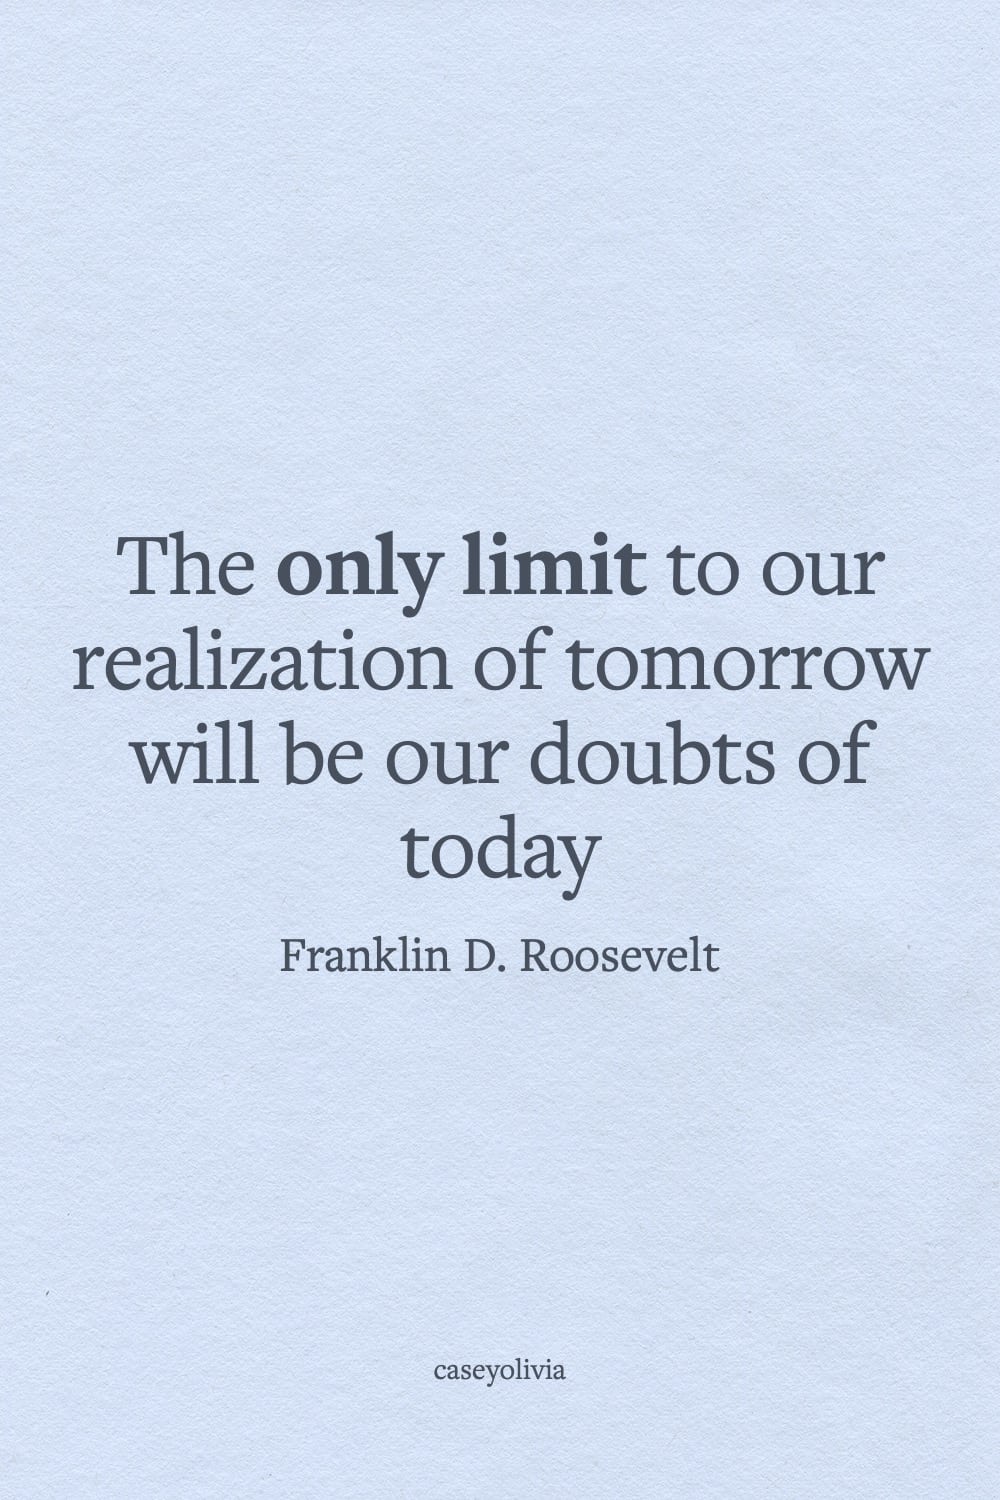 only limit to our realization of tomorrow inspiring words